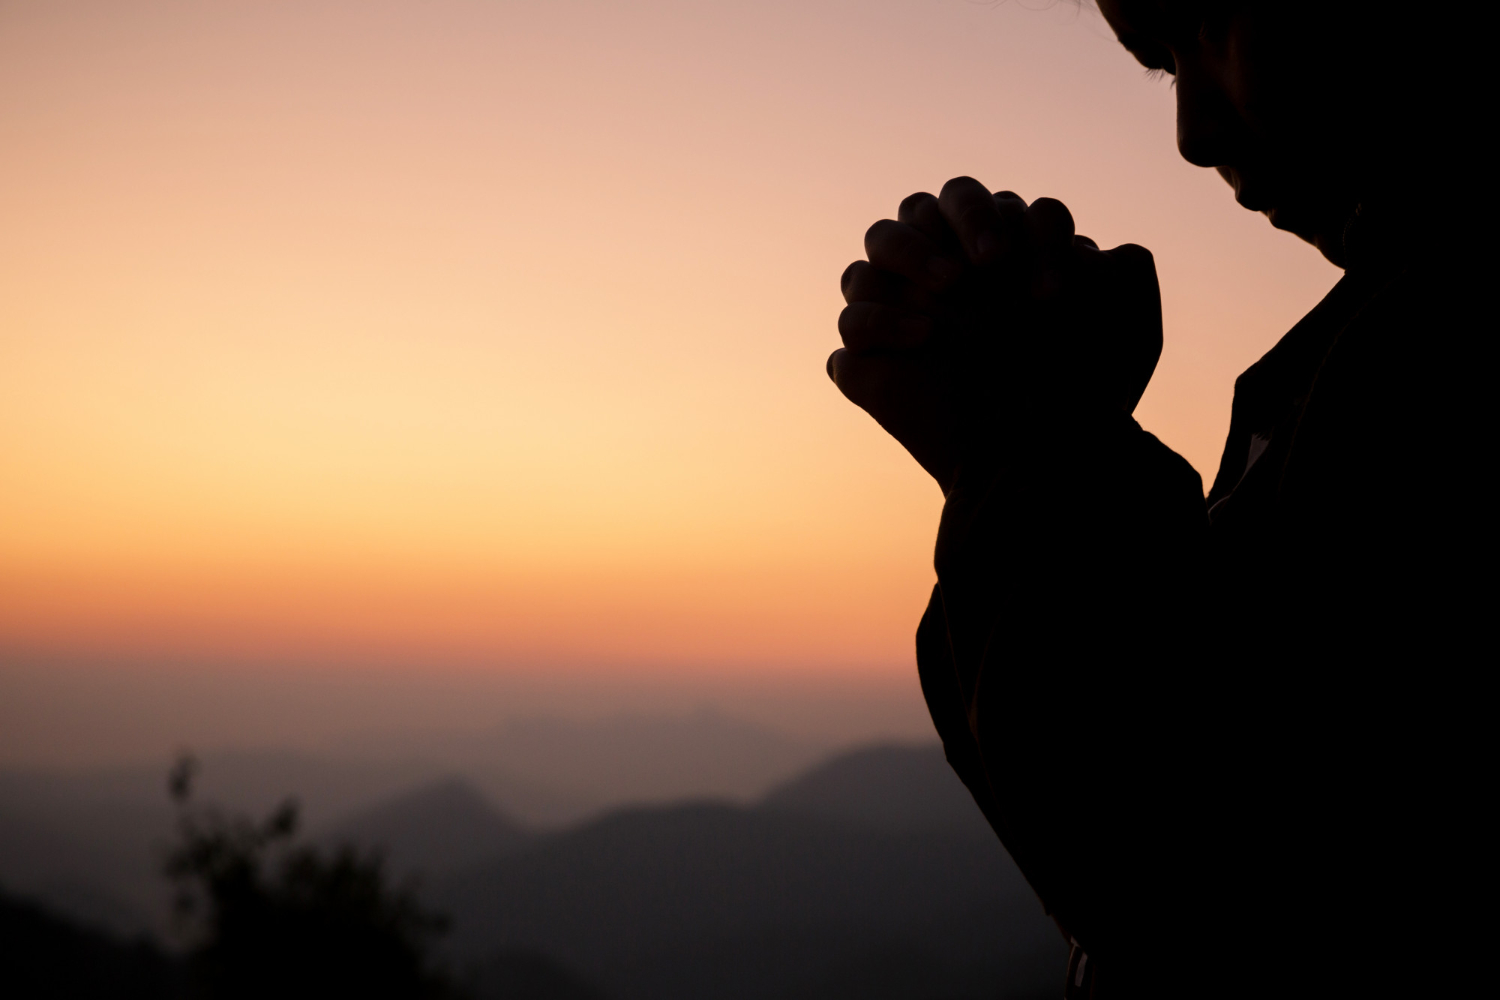 A girl is praying in the sunset background.